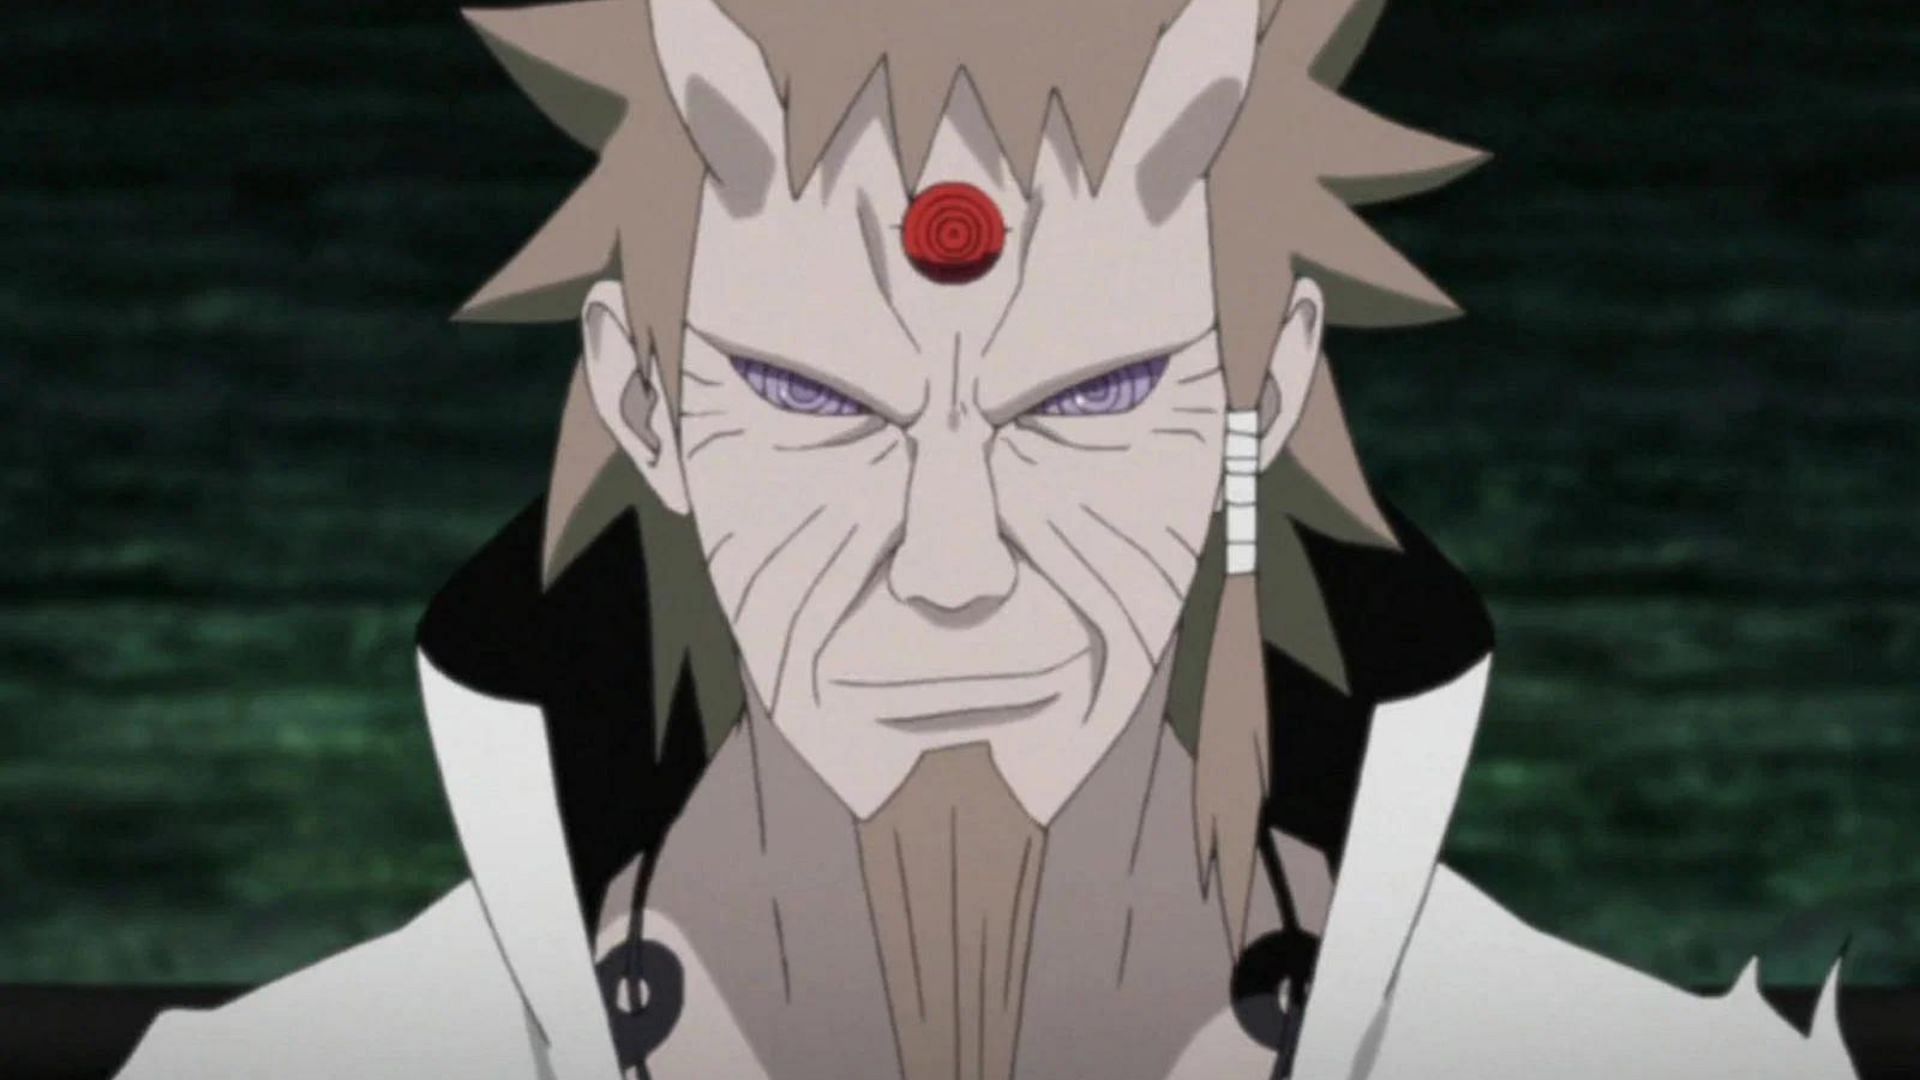 The Sage of Six Paths as seen in Naruto Shippuden anime (Image via Studio Pierrot)